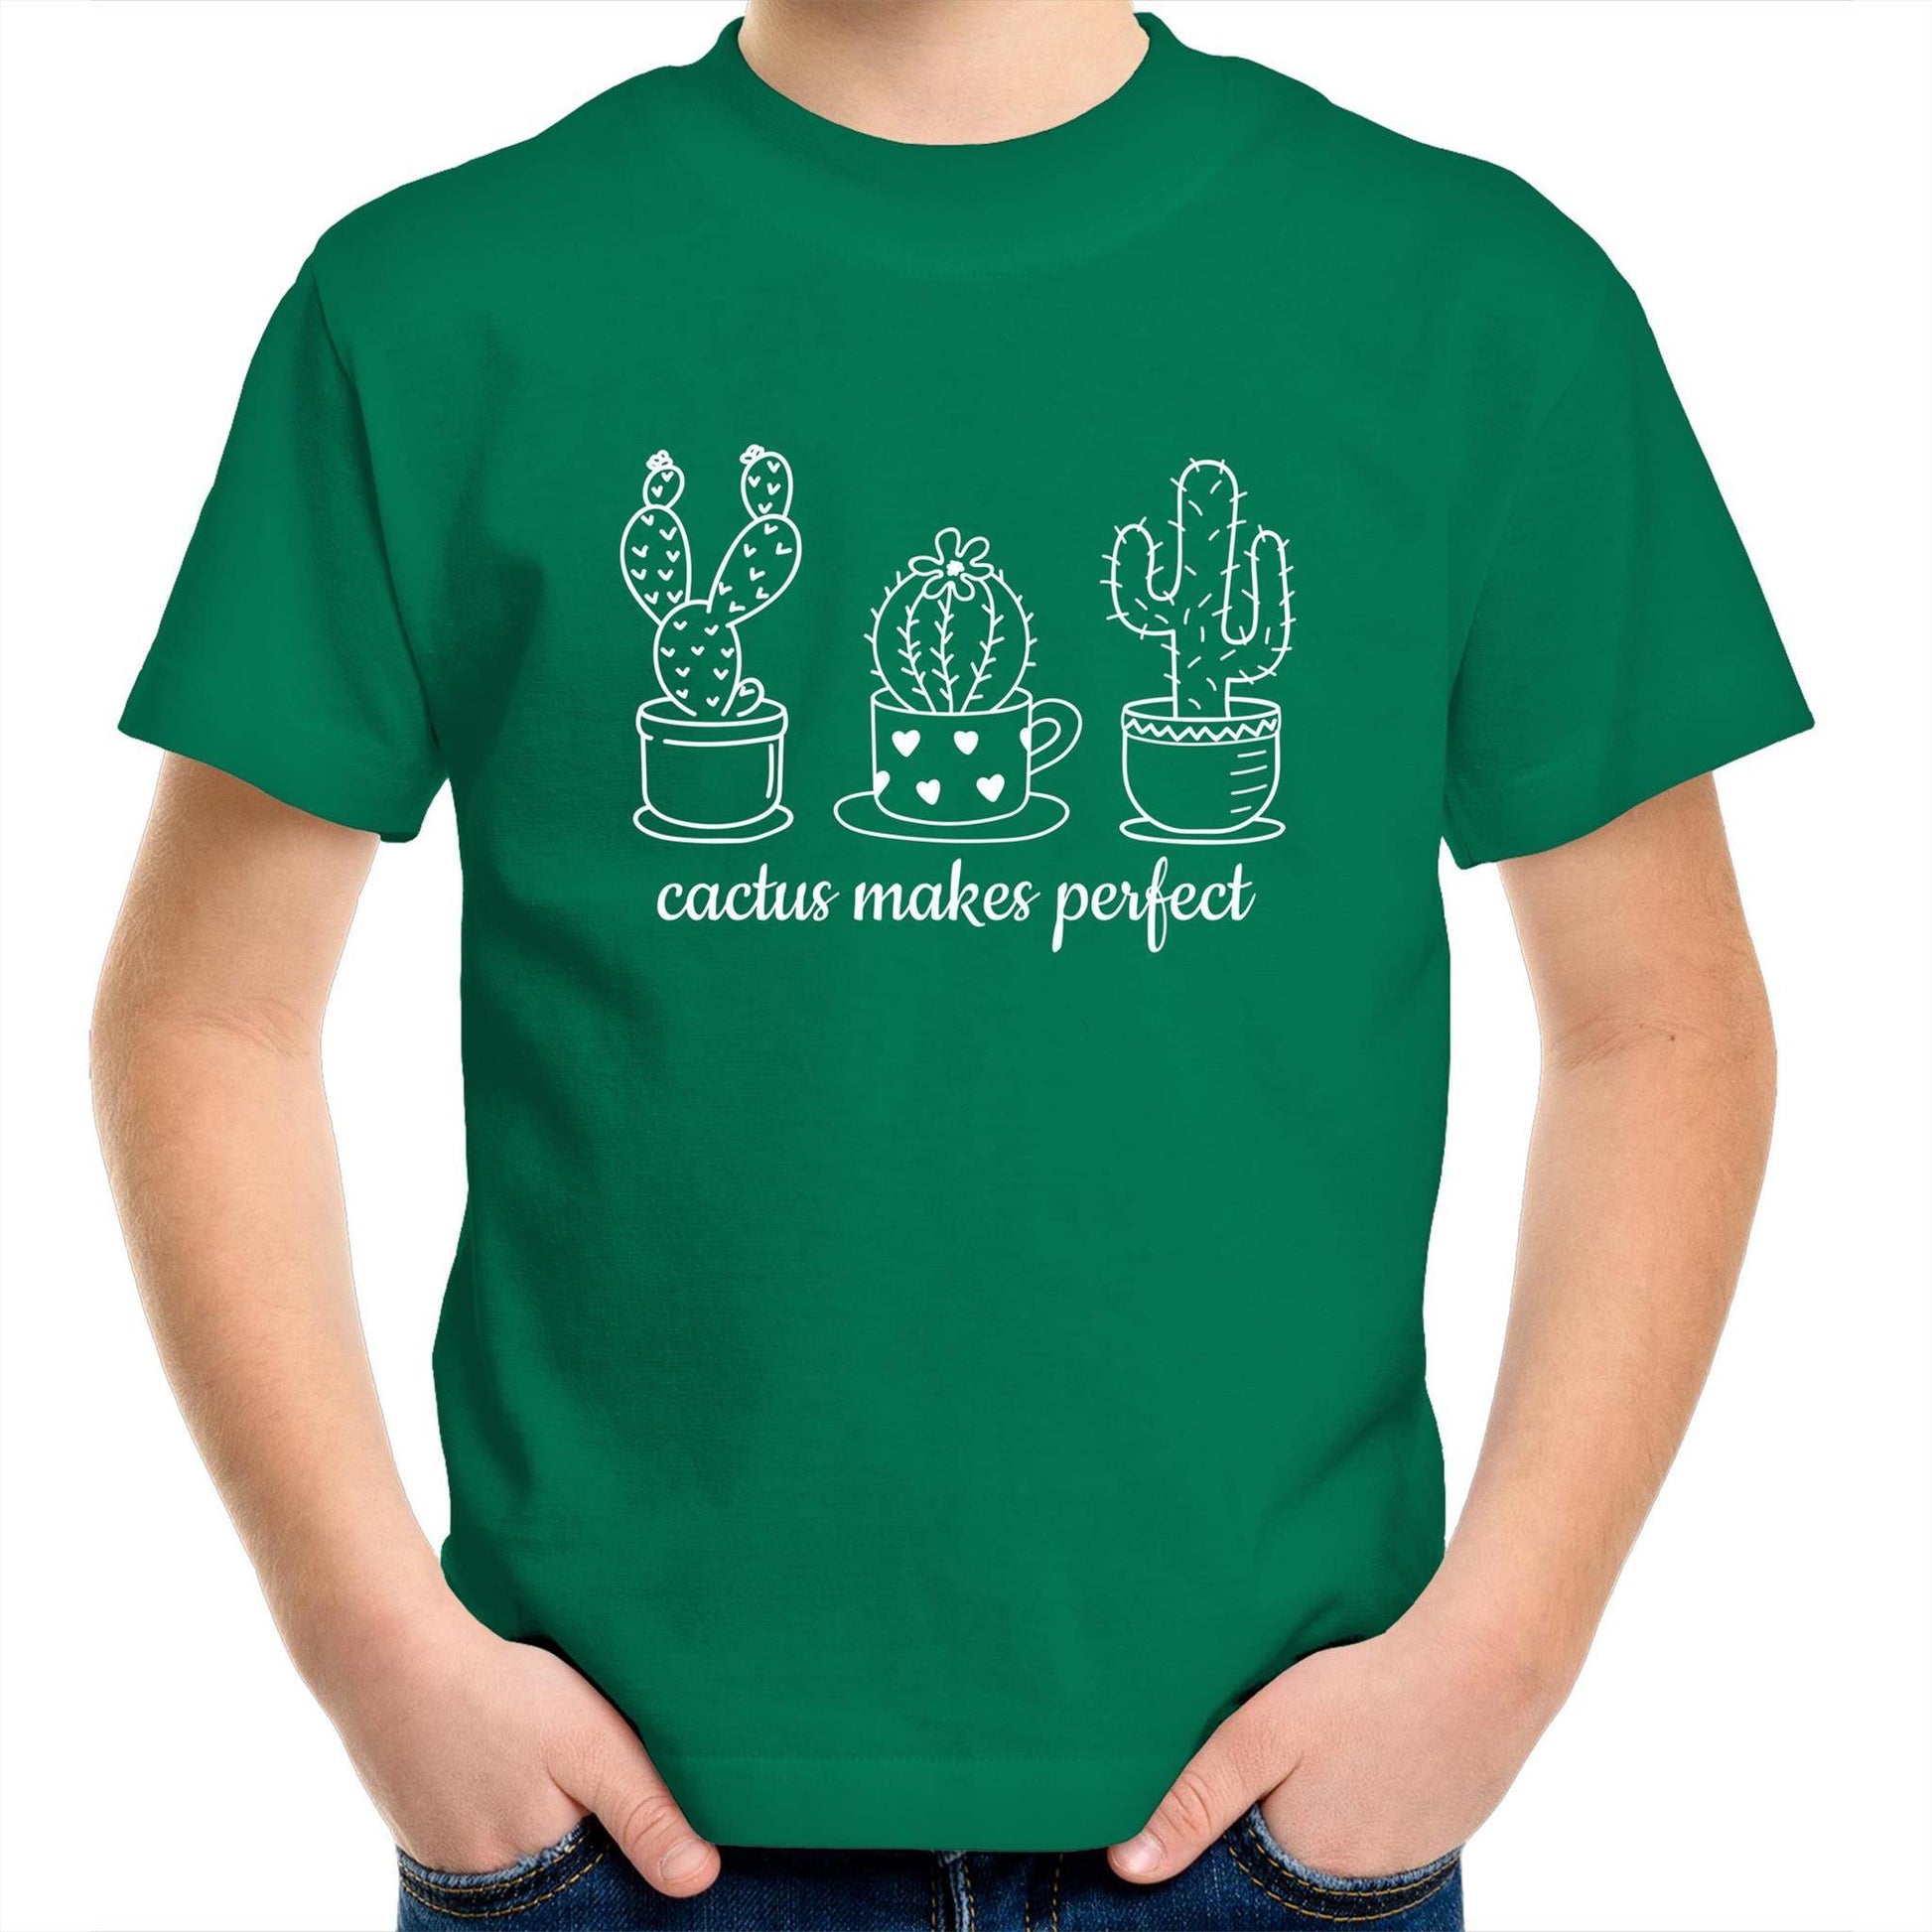 Cactus Makes Perfect - Kids Youth Crew T-Shirt Kelly Green Kids Youth T-shirt Plants